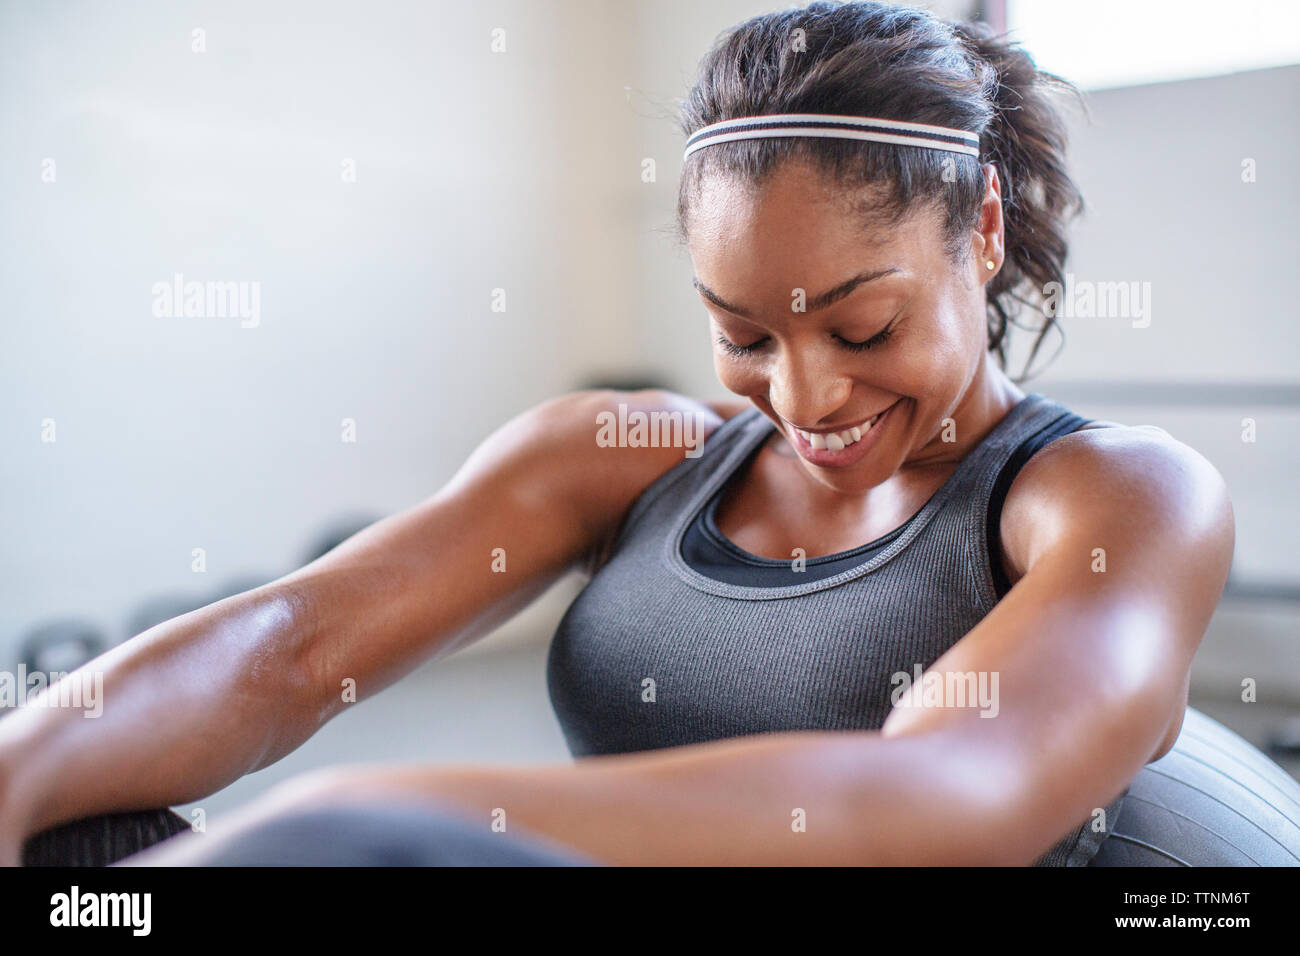 Smiling athlete exercising with medicine ball in gym Stock Photo